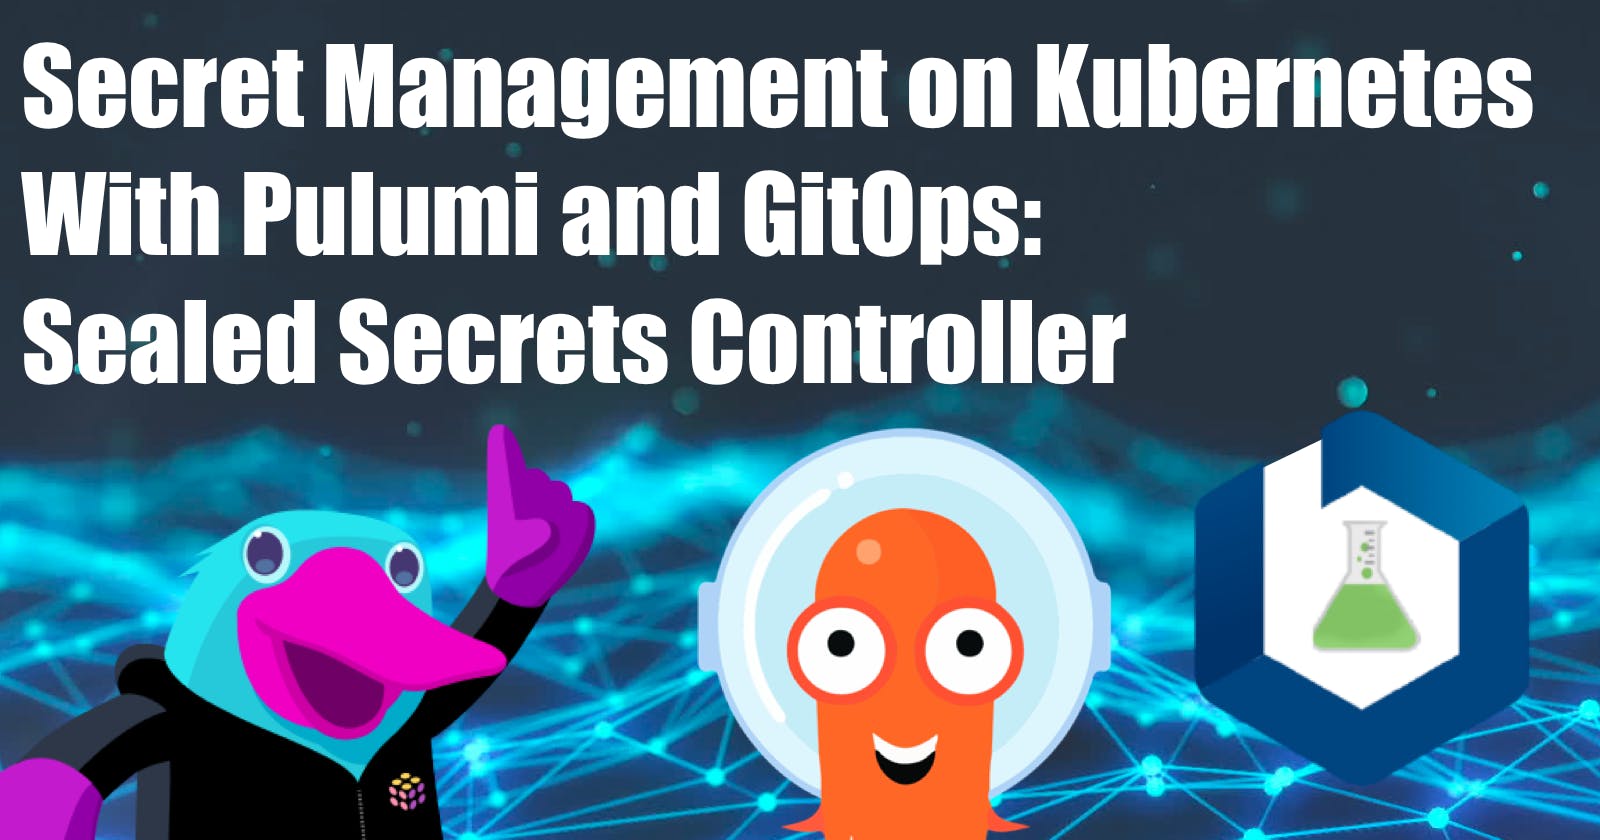 Advanced Secret Management on Kubernetes With Pulumi and GitOps: Sealed Secrets Controller